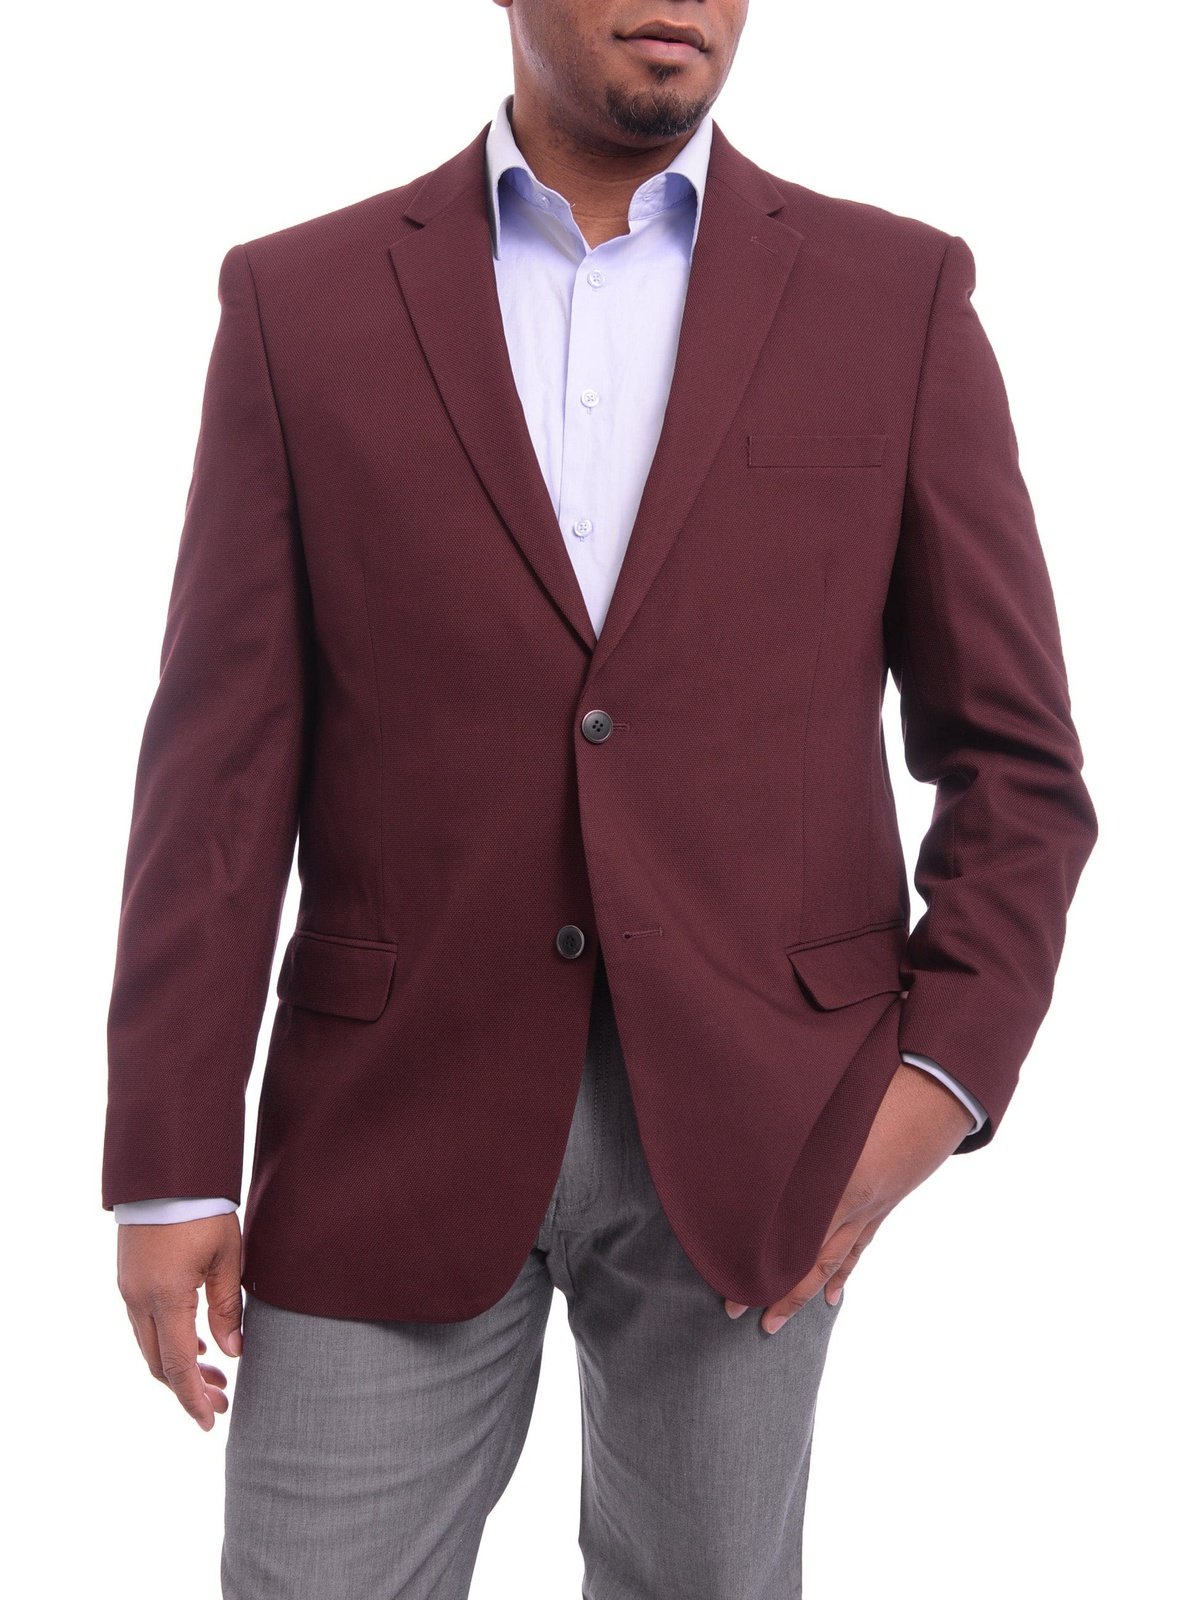 Caravelli BLAZERS Caravelli Classic Fit Hopsack Weave Burgundy Two Button Stretch Blazer Sportcoat